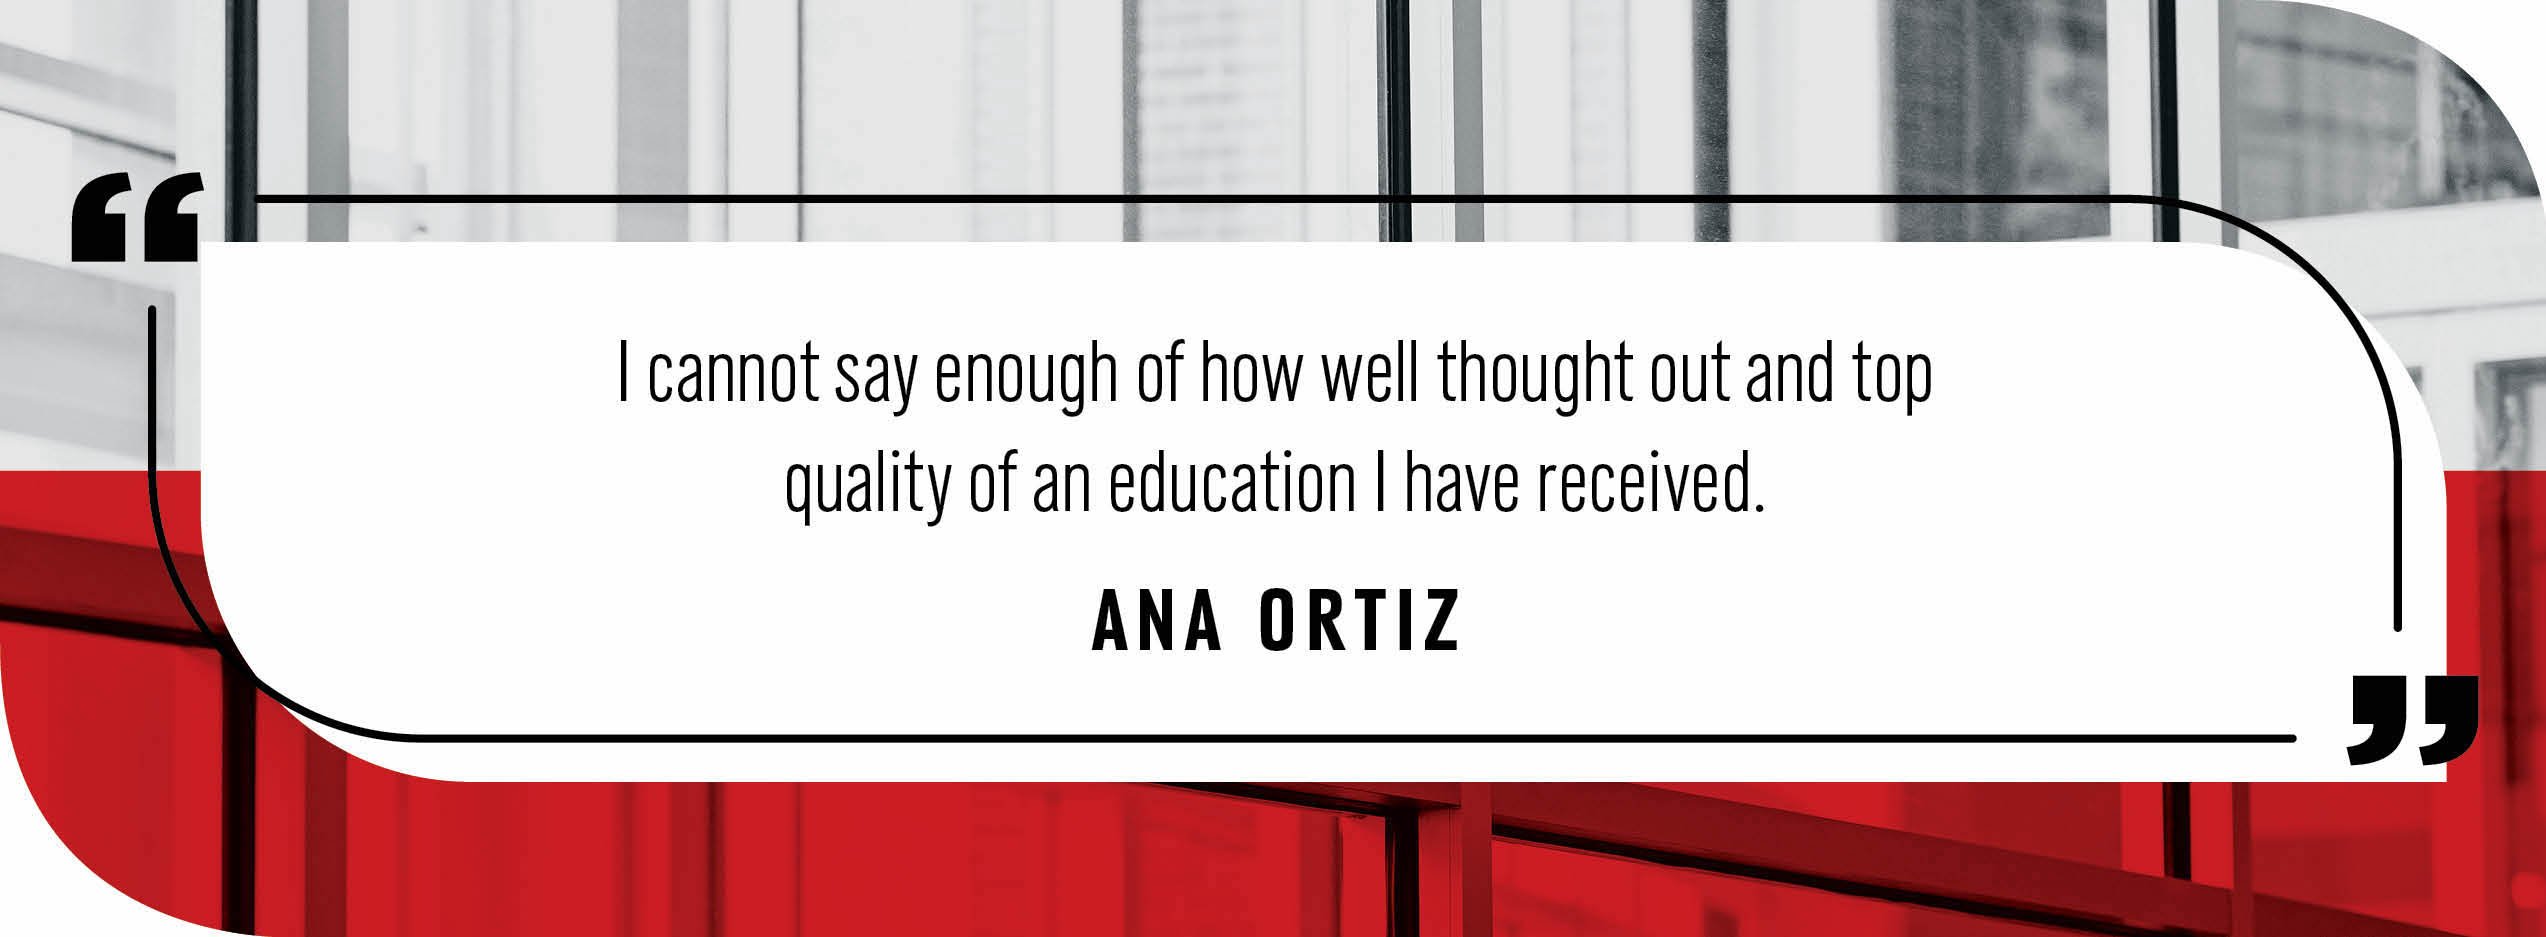 Quote by Ana Ortiz: "I cannot say enough of how well thought out and top quality of an education I have received."